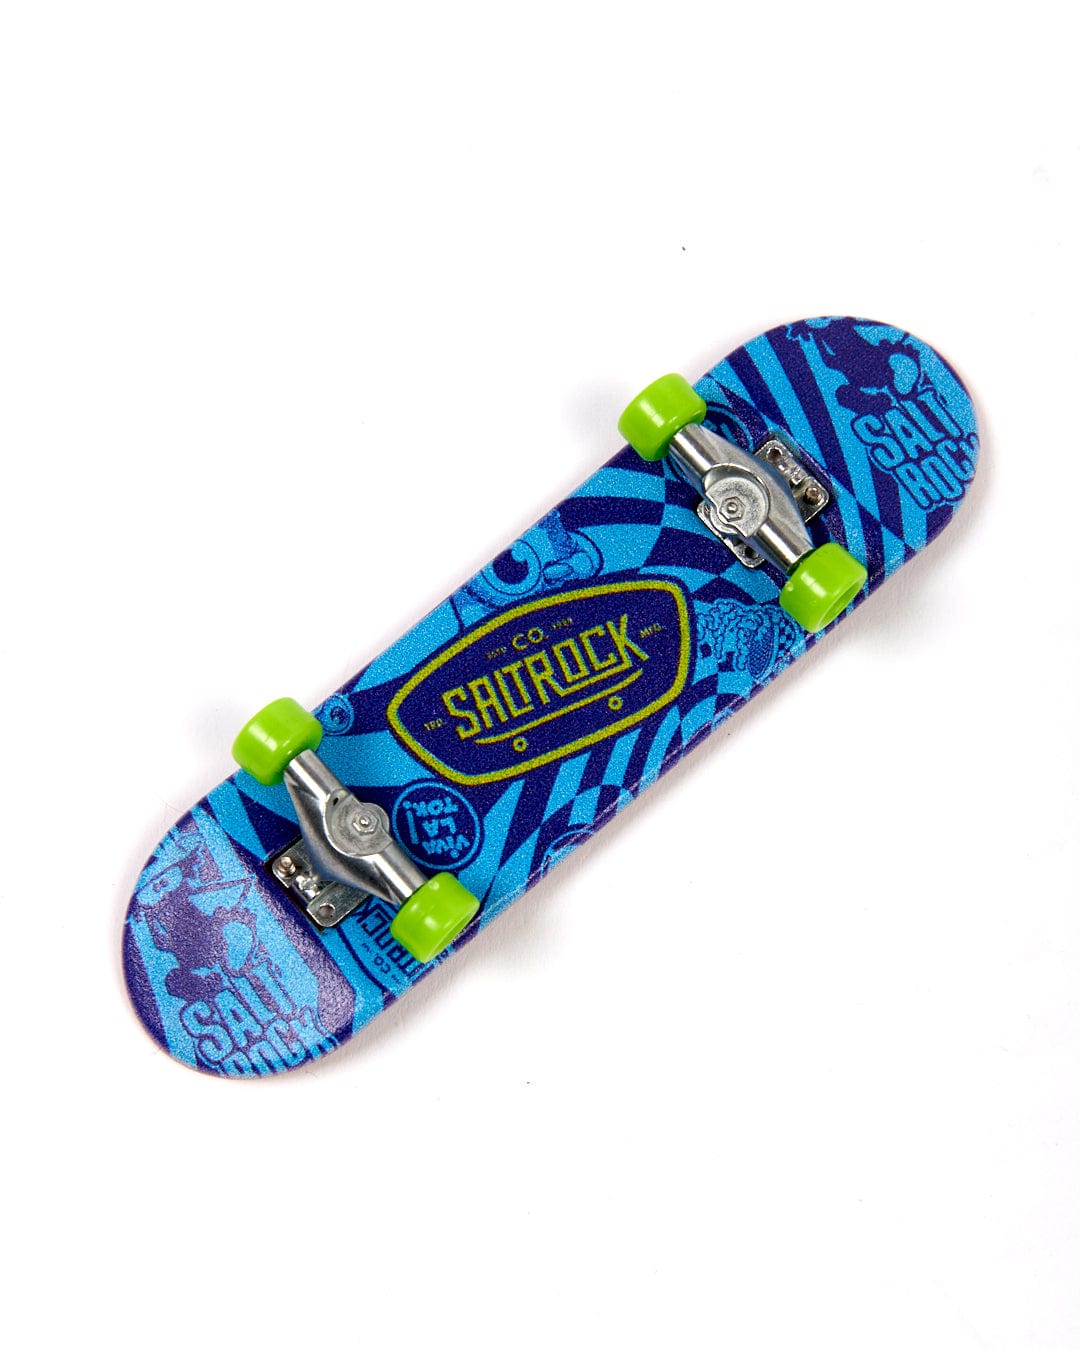 A Warp Icon finger skateboard by Saltrock with a blue and green design.